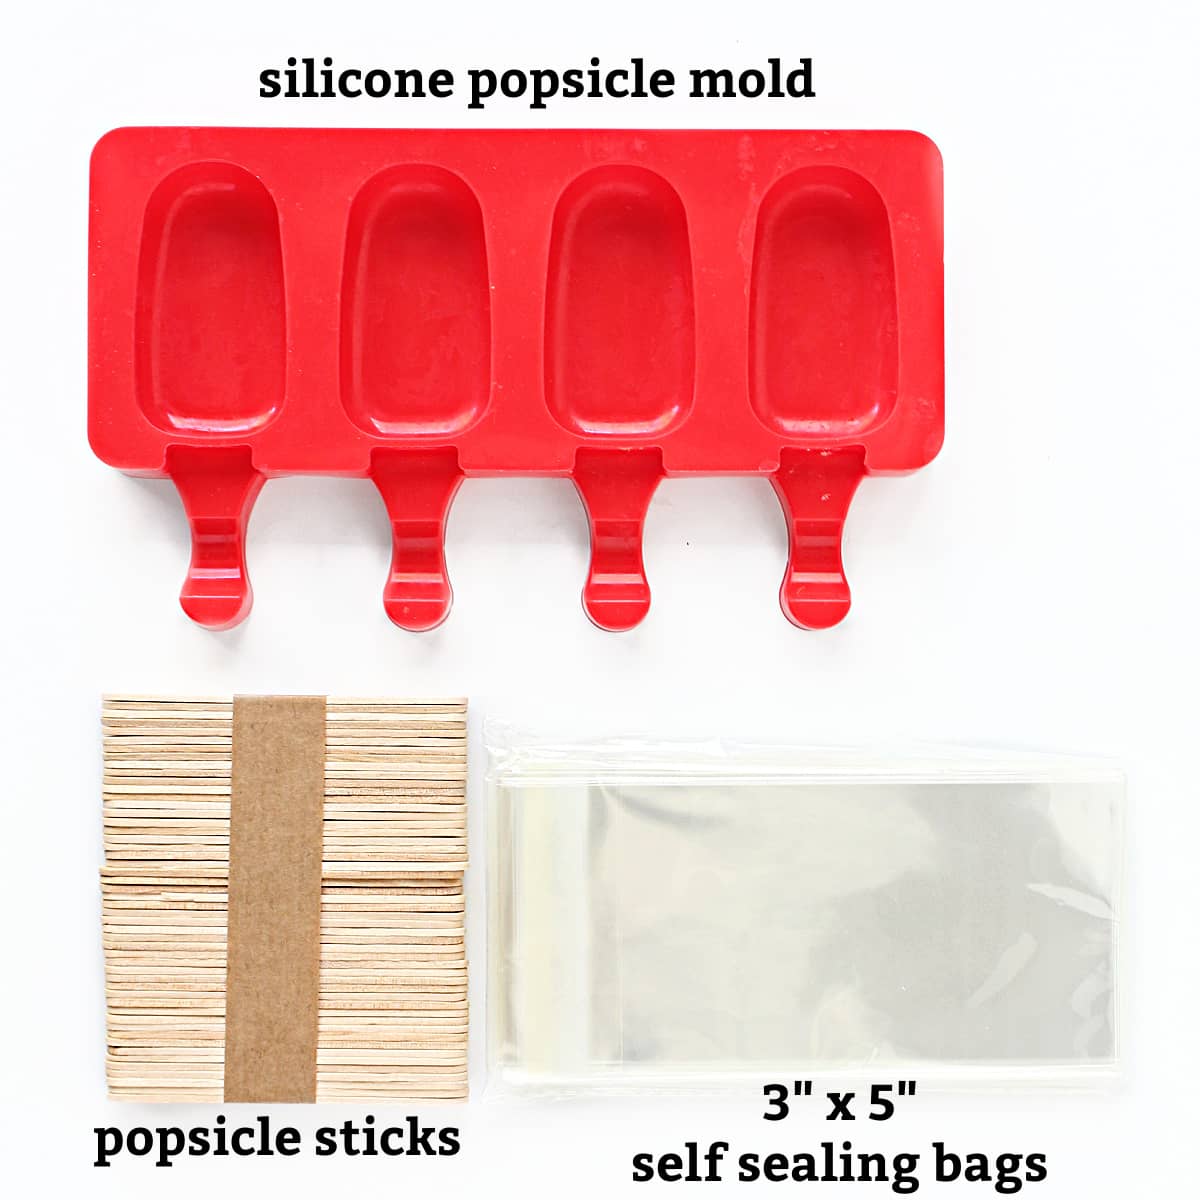 Equipment: silicone popsicle mold, popsicle sticks, 3" x 5" self sealing acetate bags.